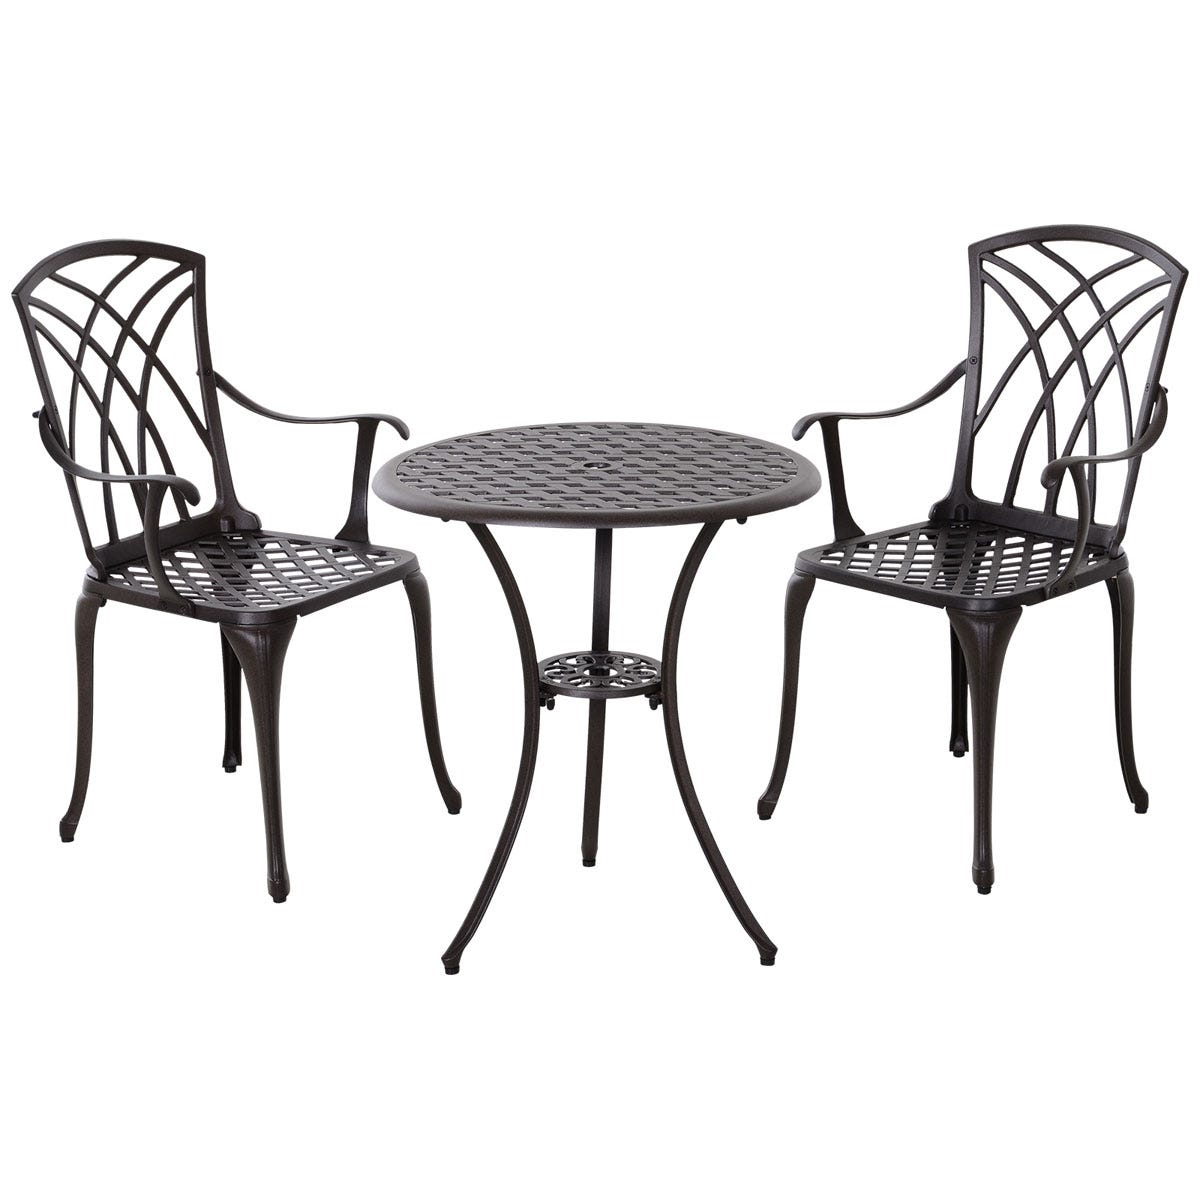 Outsunny 3pc Coffee Table Chairs Outdoor Garden Furniture Set w/ Umbrella Hole